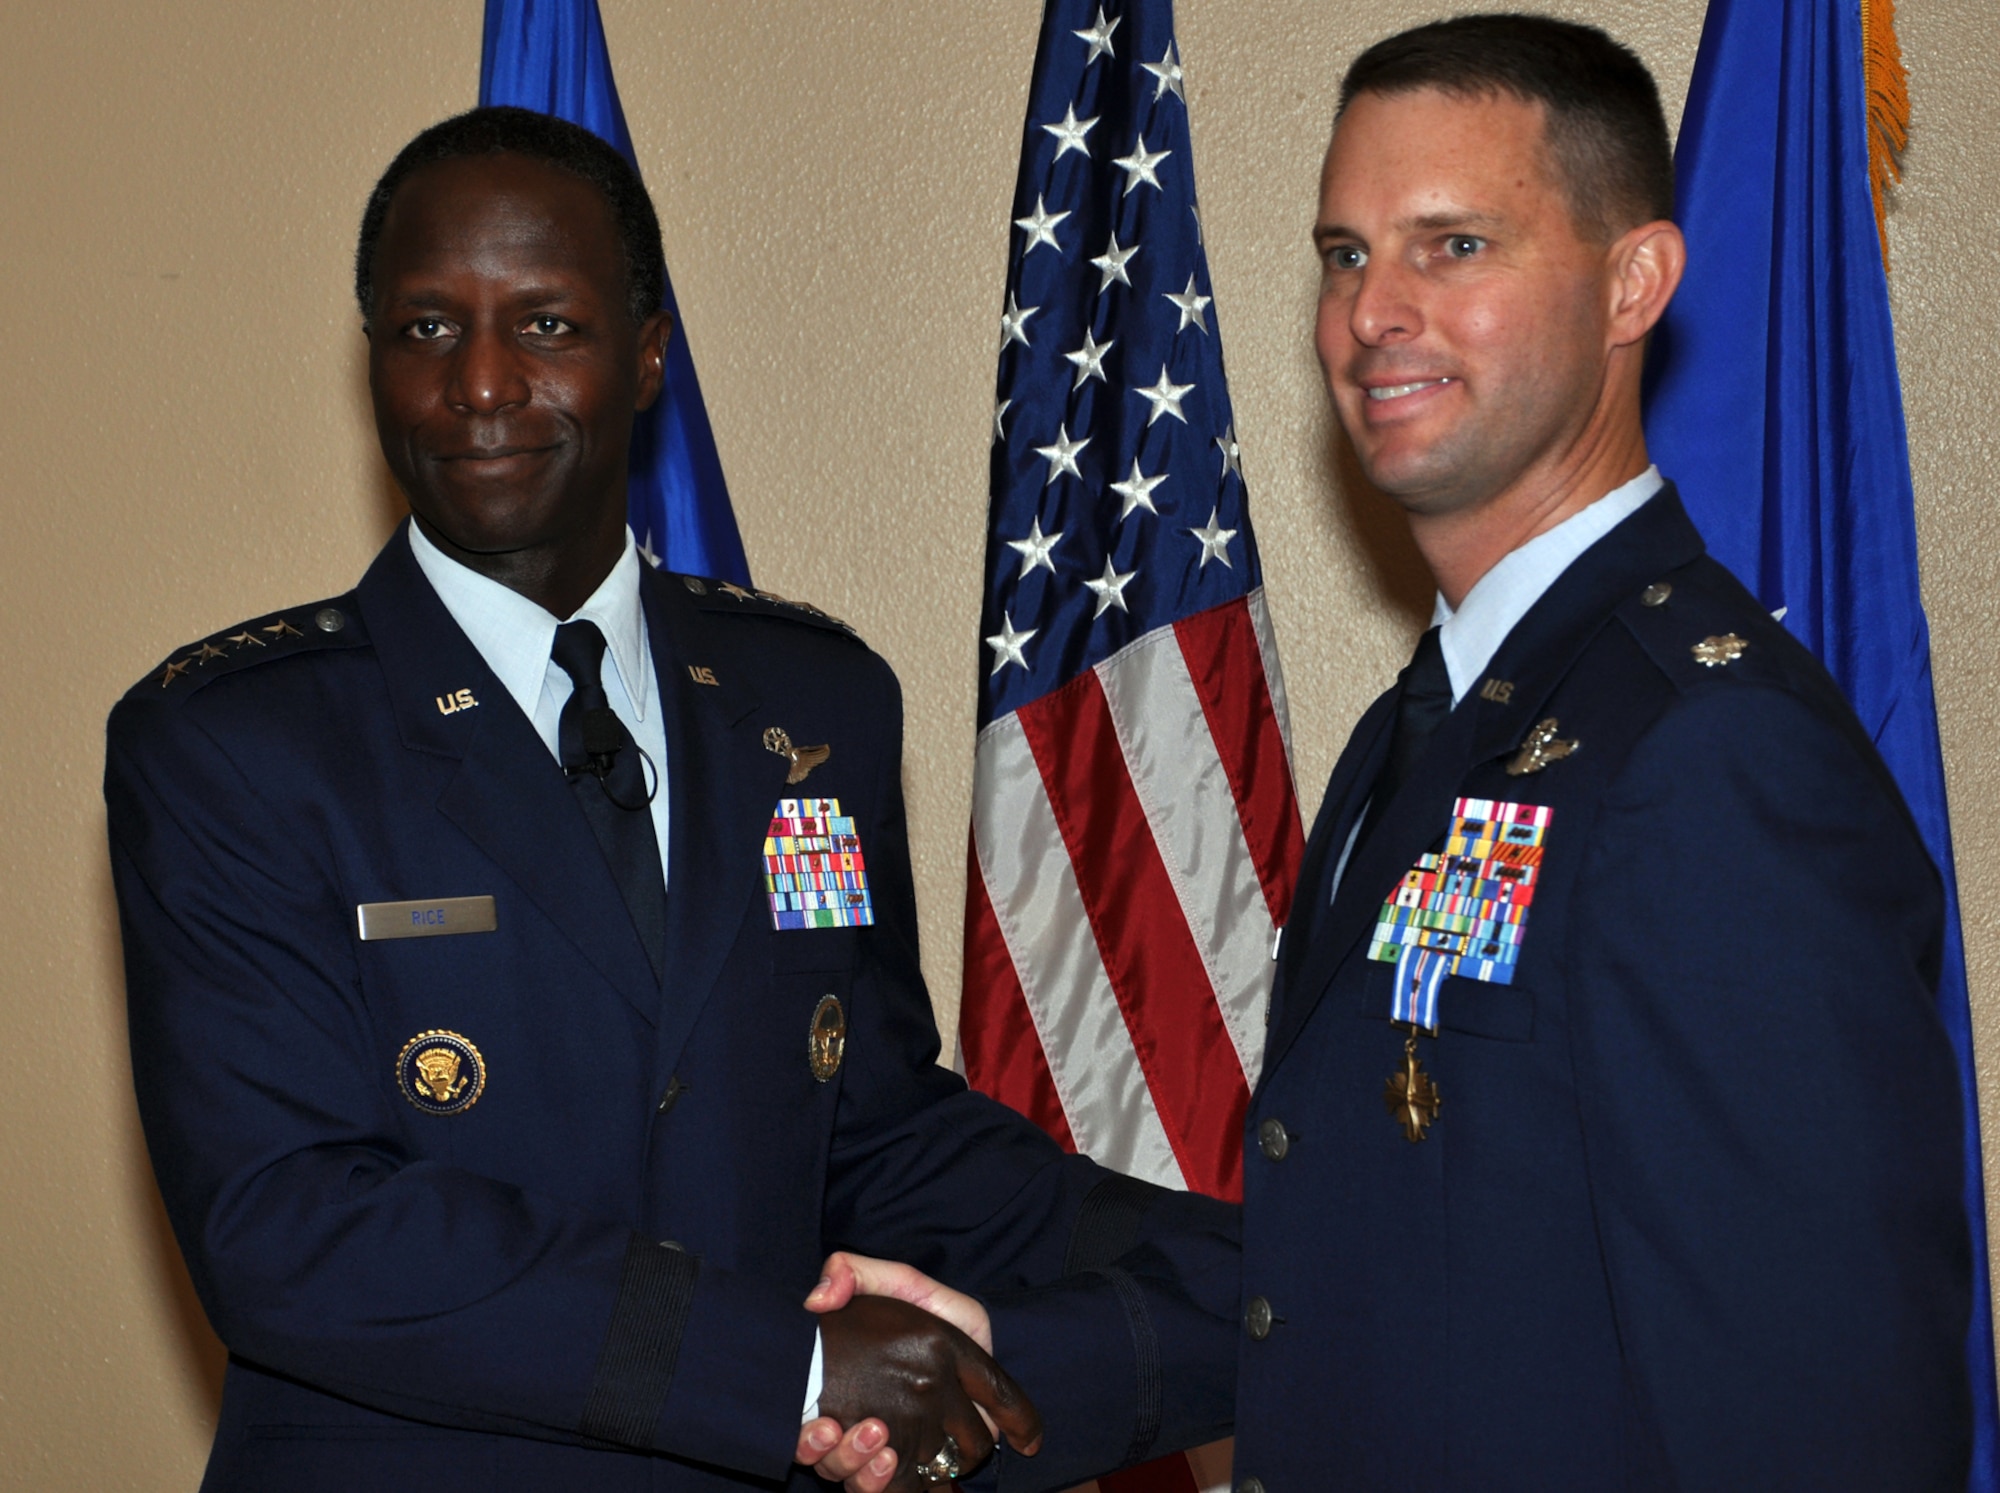 Gen. Edward A. Rice Jr., commander of Air Education and Training Command,
congratulates Lt. Col. Gregory Roberts, 19th Air Force, after presenting him
the Distinguished Flying Cross with valor at Randolph Air Force Base, Texas,
Nov. 9. Roberts earned the award for actions he took while rescuing more
than 1,000 people from severe flooding in Afghanistan in July 2010.
